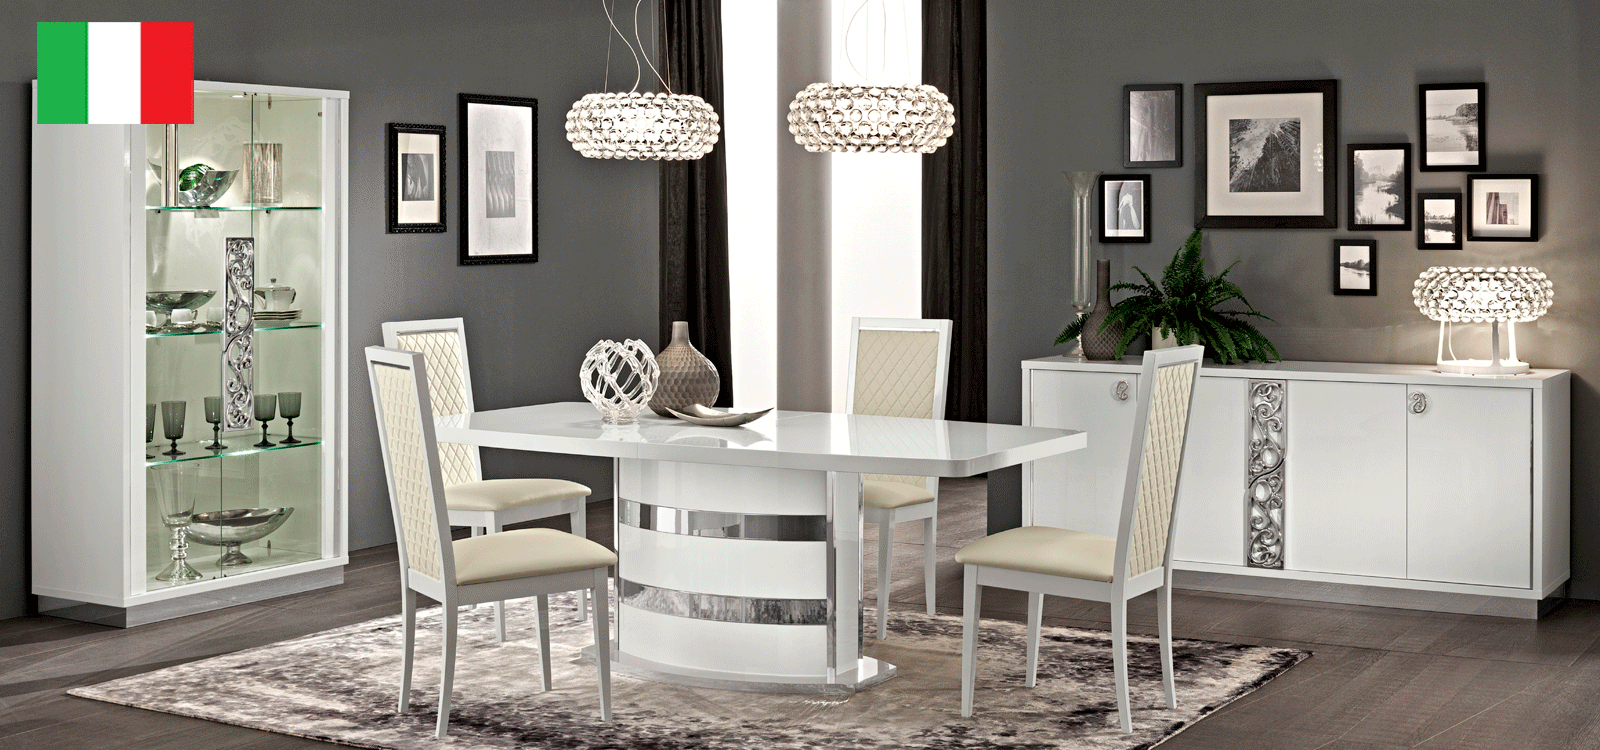 Dining Room Furniture China Cabinets and Buffets Roma Dining White, Italy